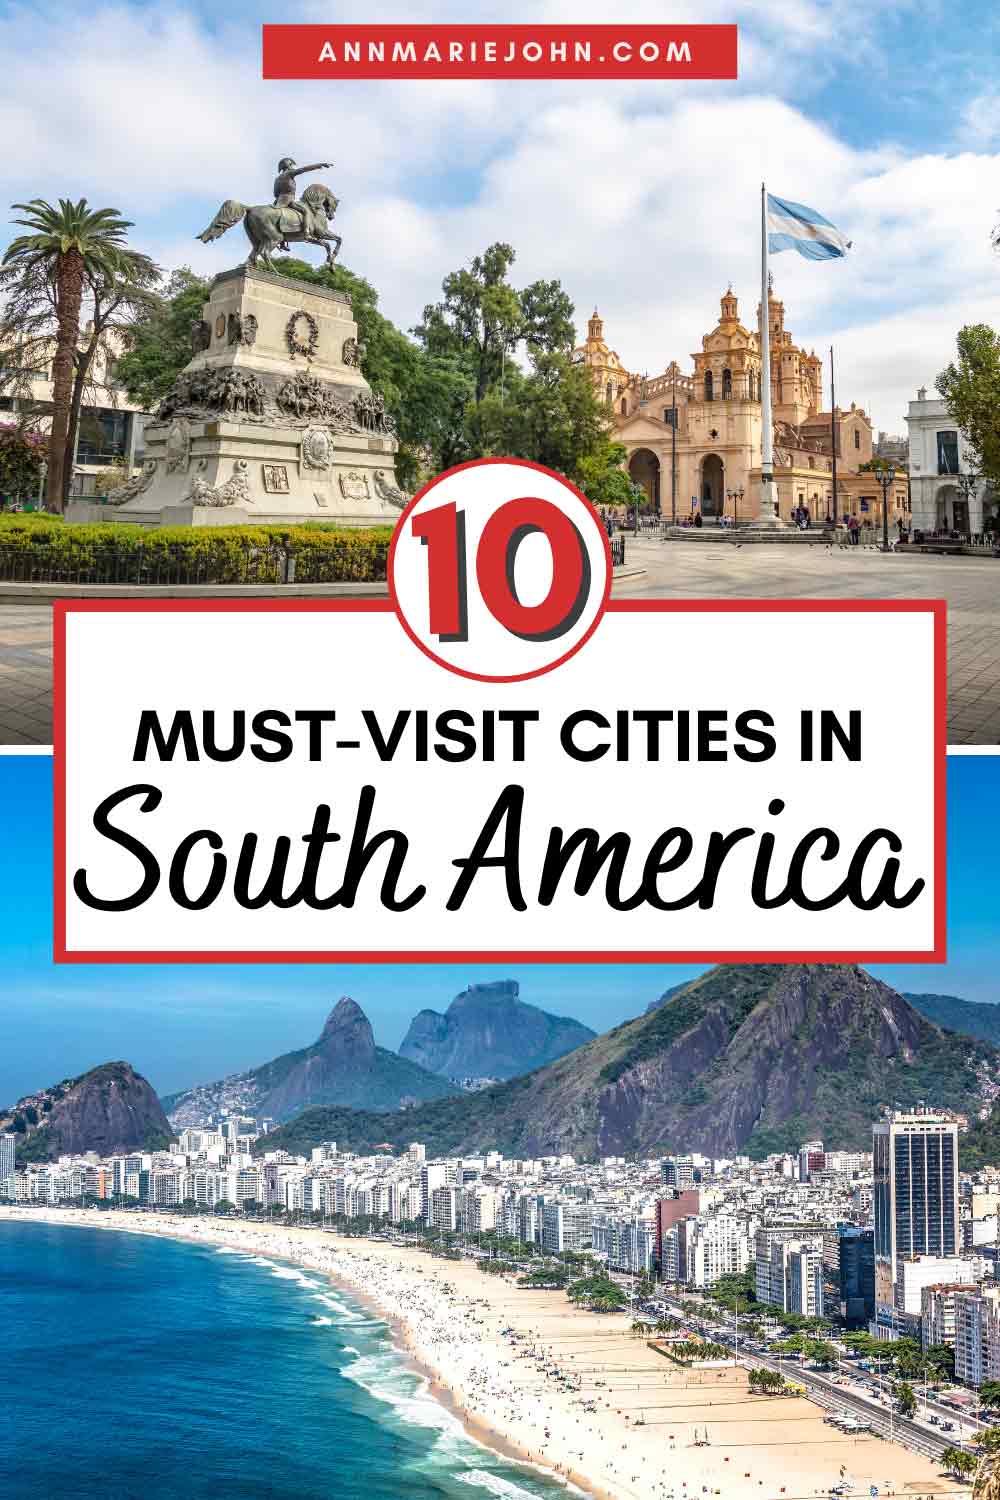 Must-Visit Cities in South America